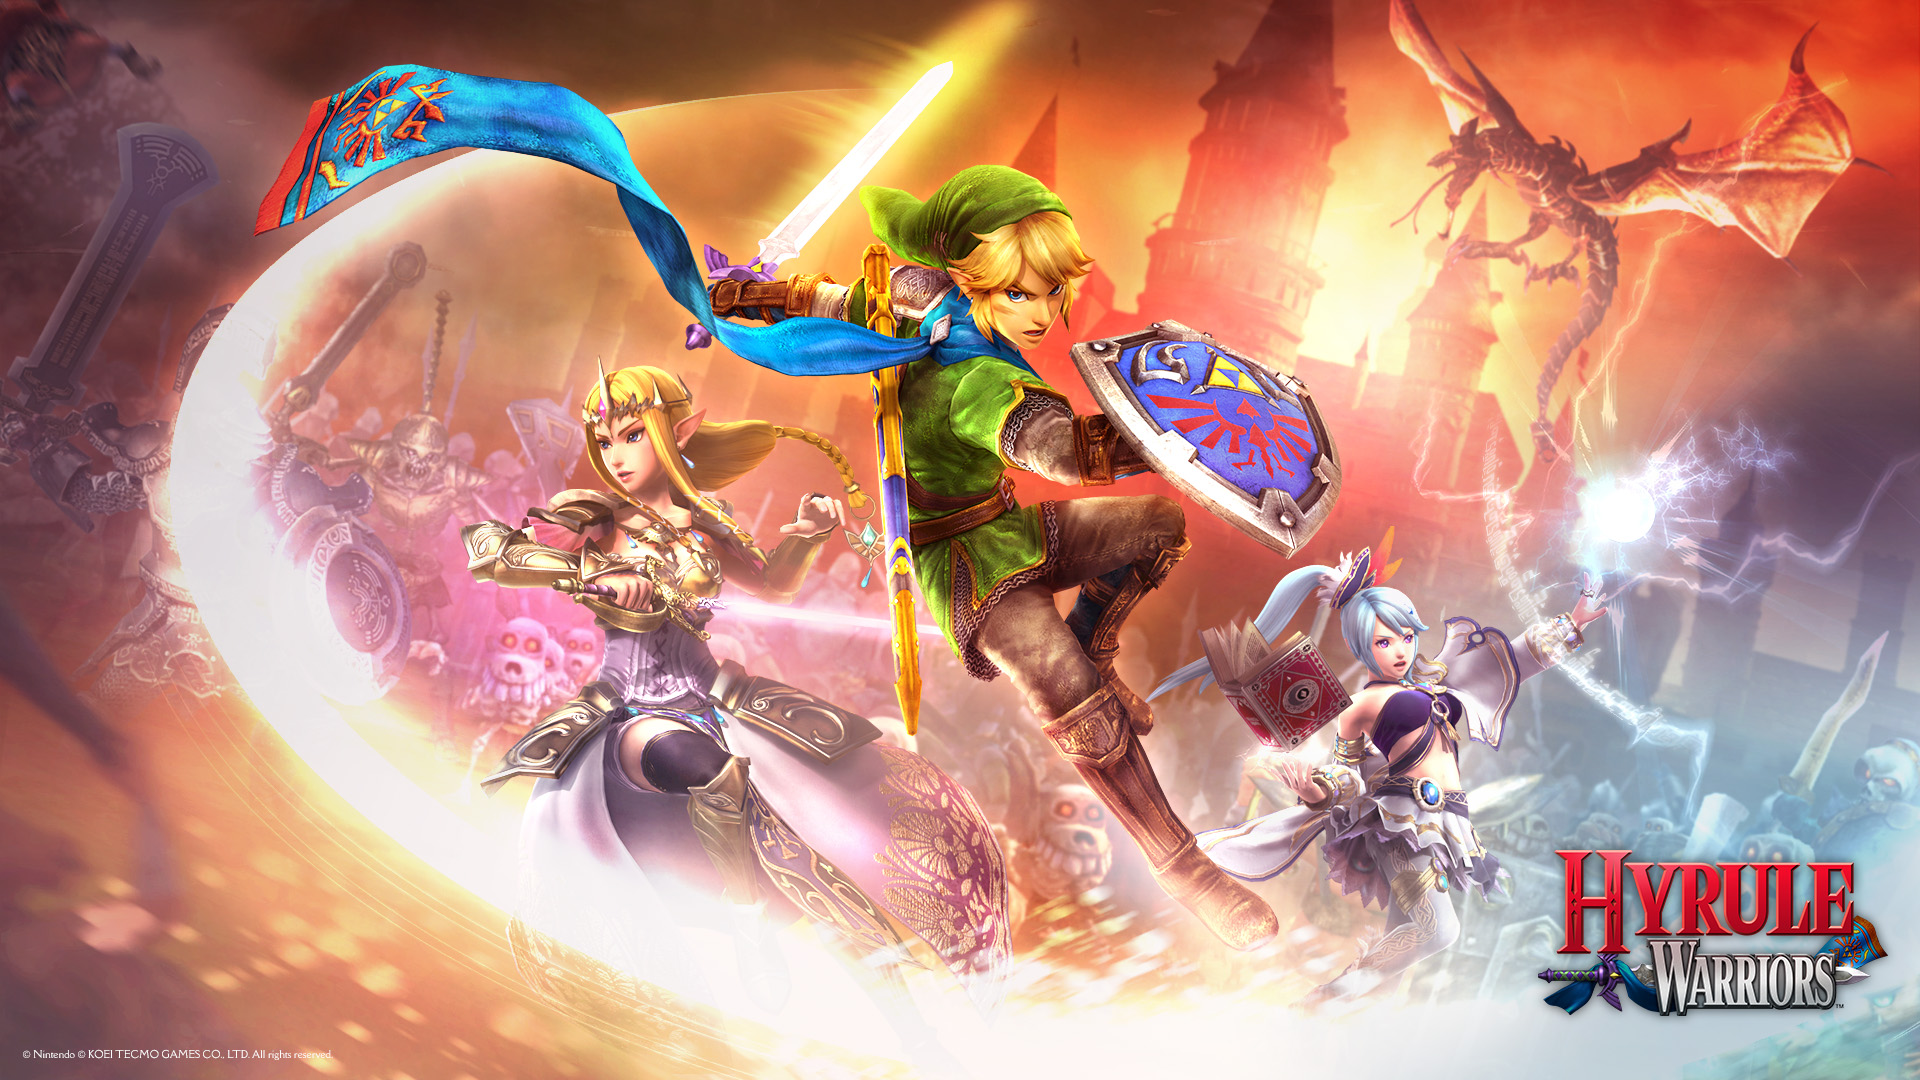 Amazing Hyrule Warriors Pictures & Backgrounds